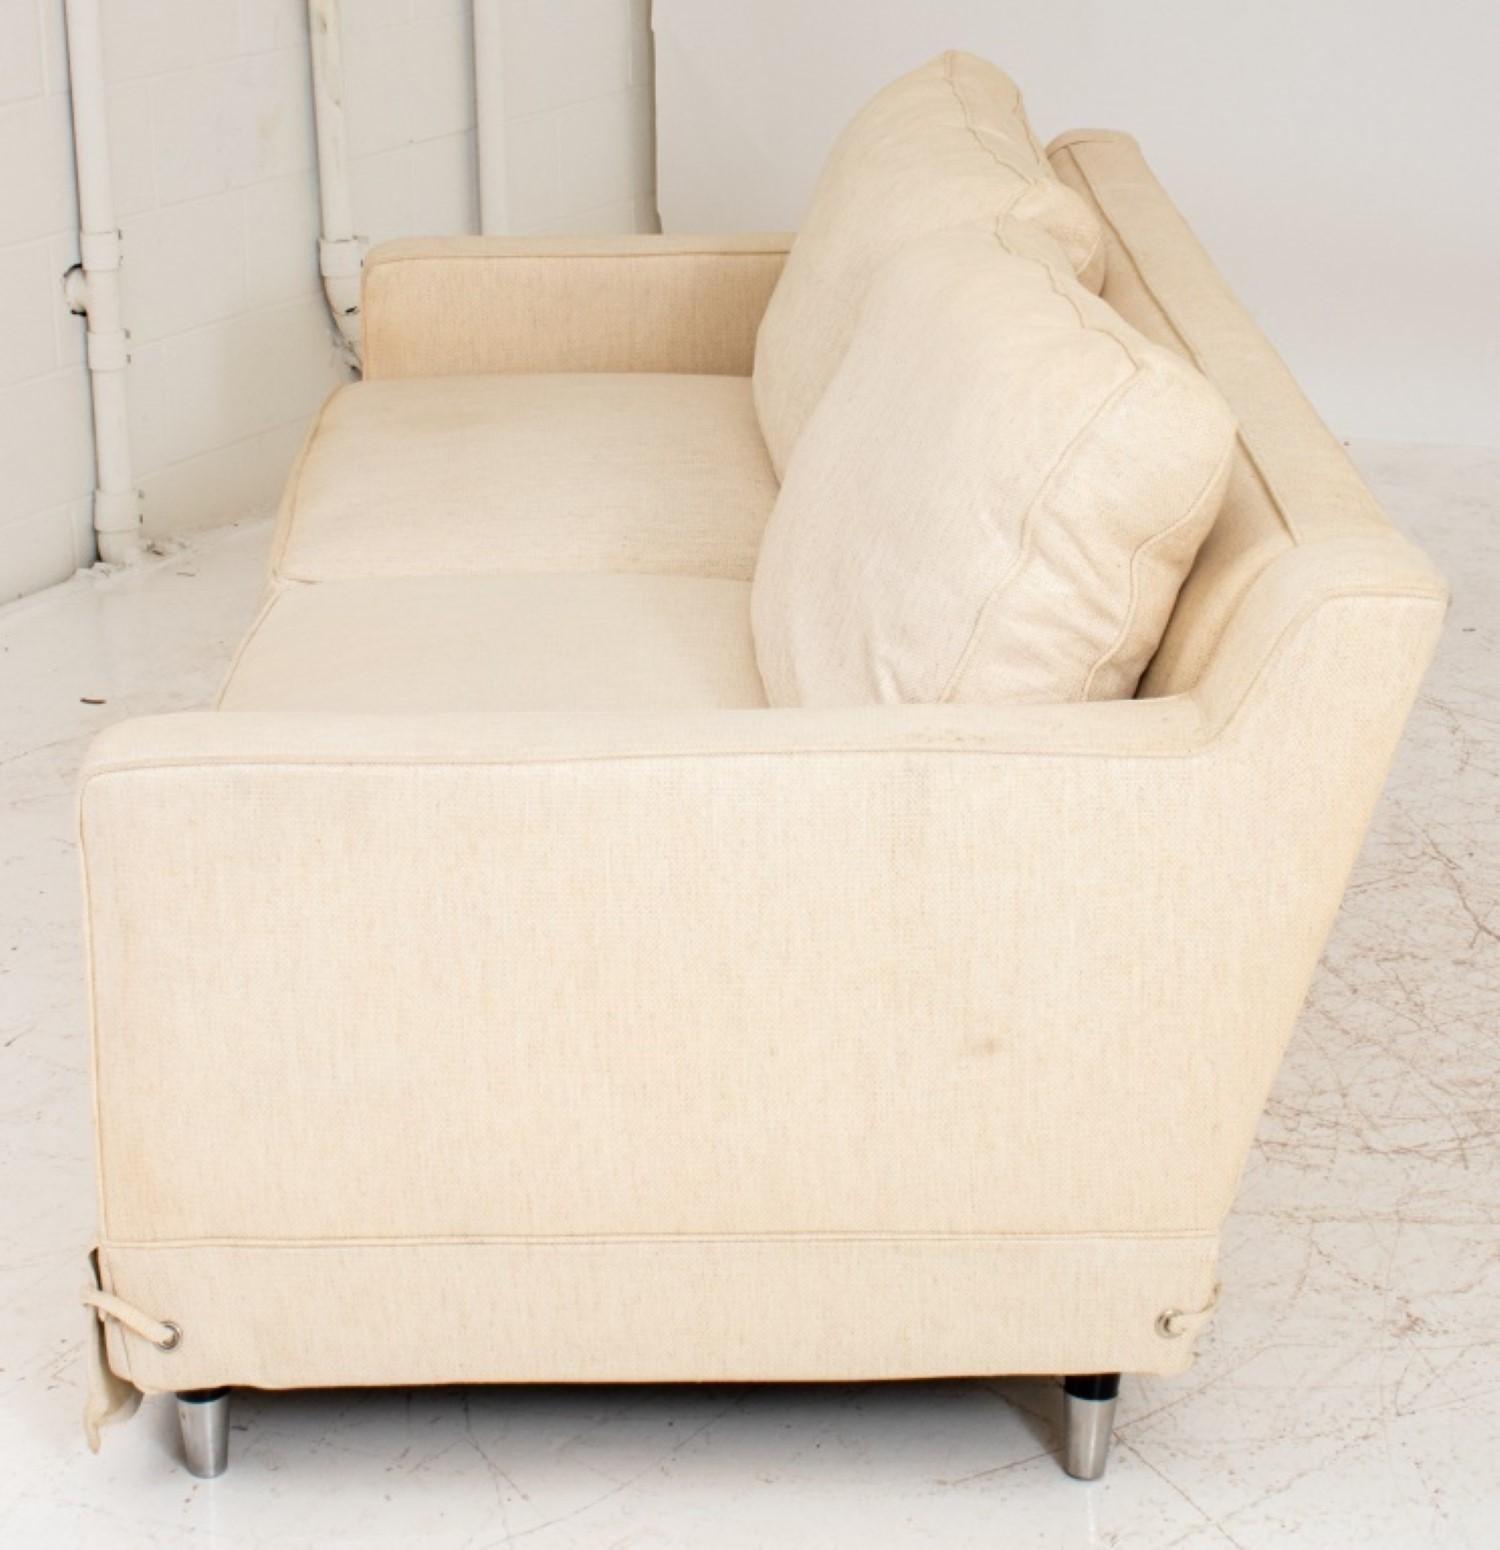 Directional Modern 'PCL' Upholstered Sofa

Brand: Directional
Model: 'PCL'
Features: Upholstered sofa with label on the bottom.

Dimensions: 26